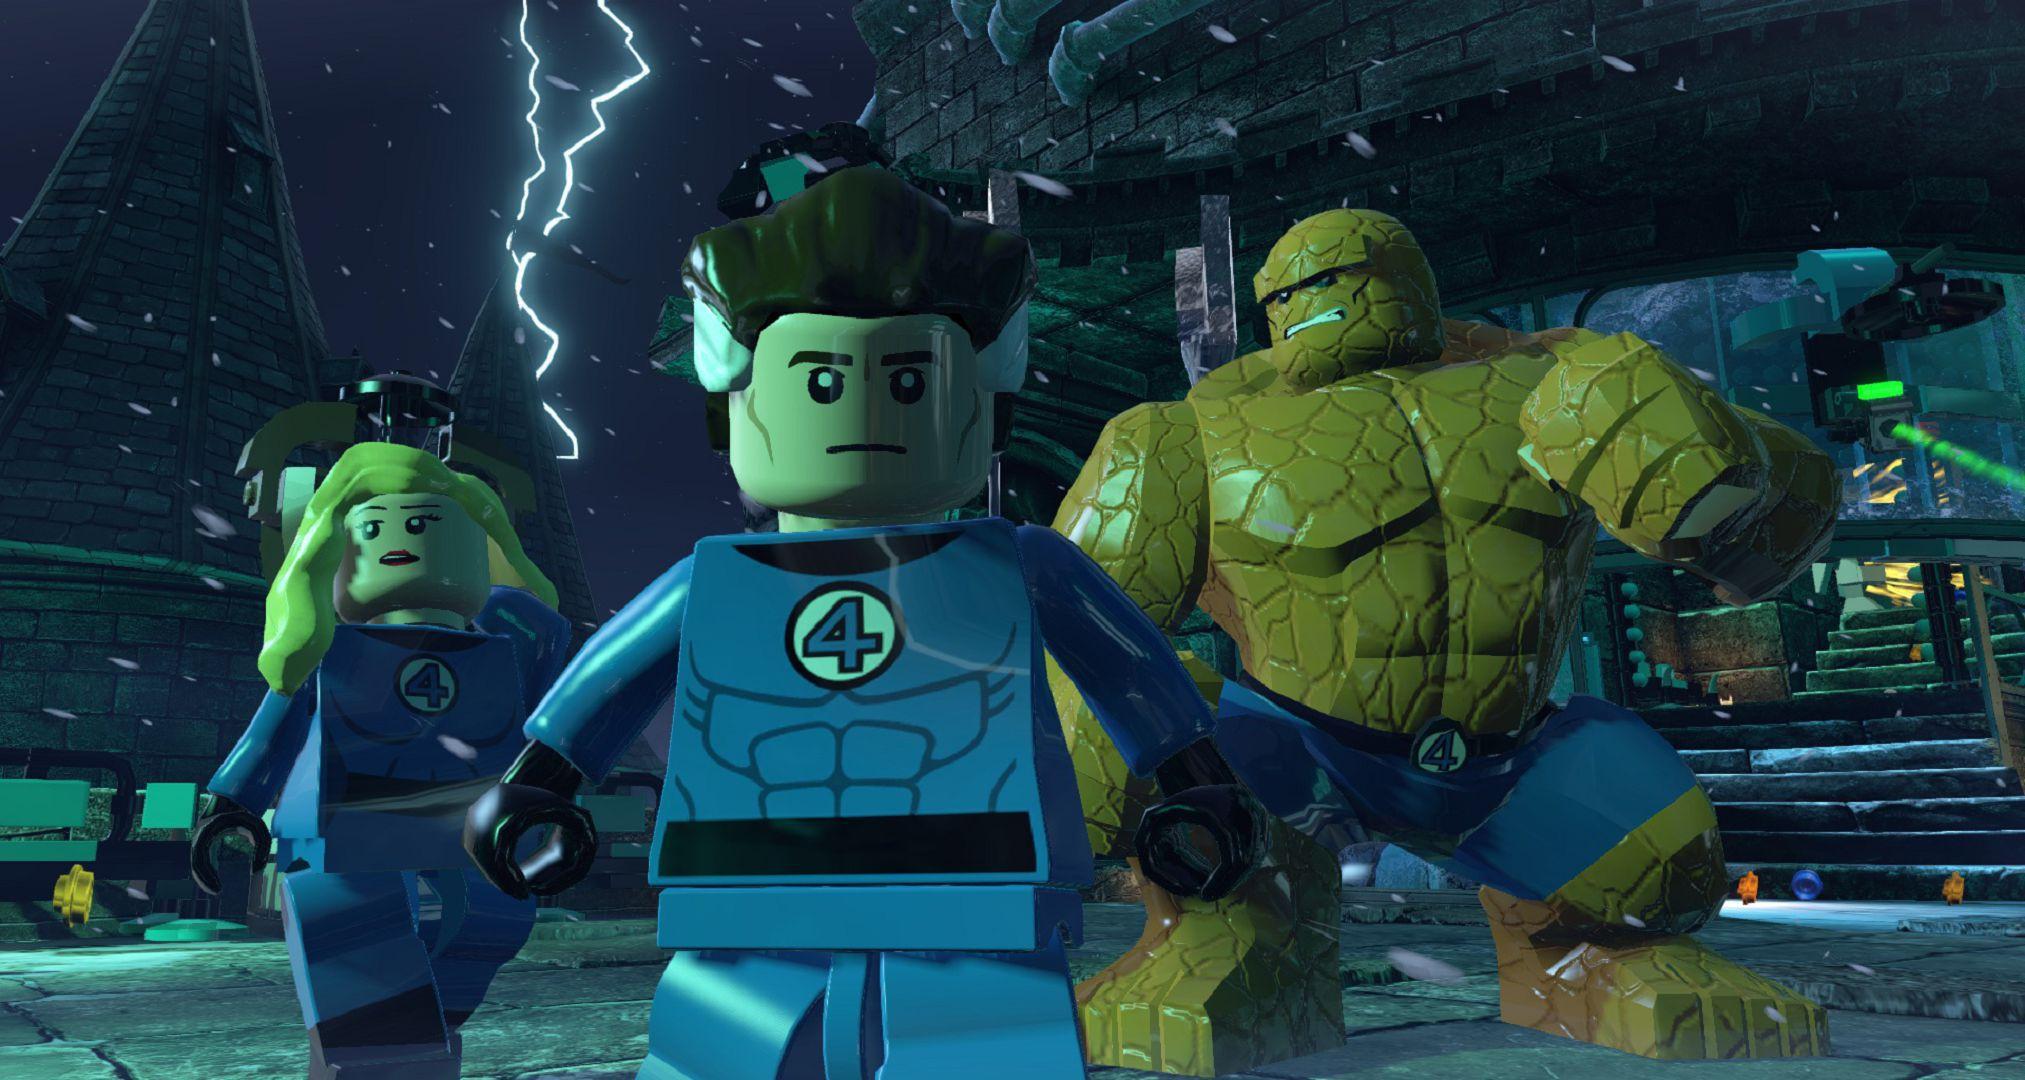 LEGO Marvel Super Heroes 2 Wallpaper Image Photo Picture Background